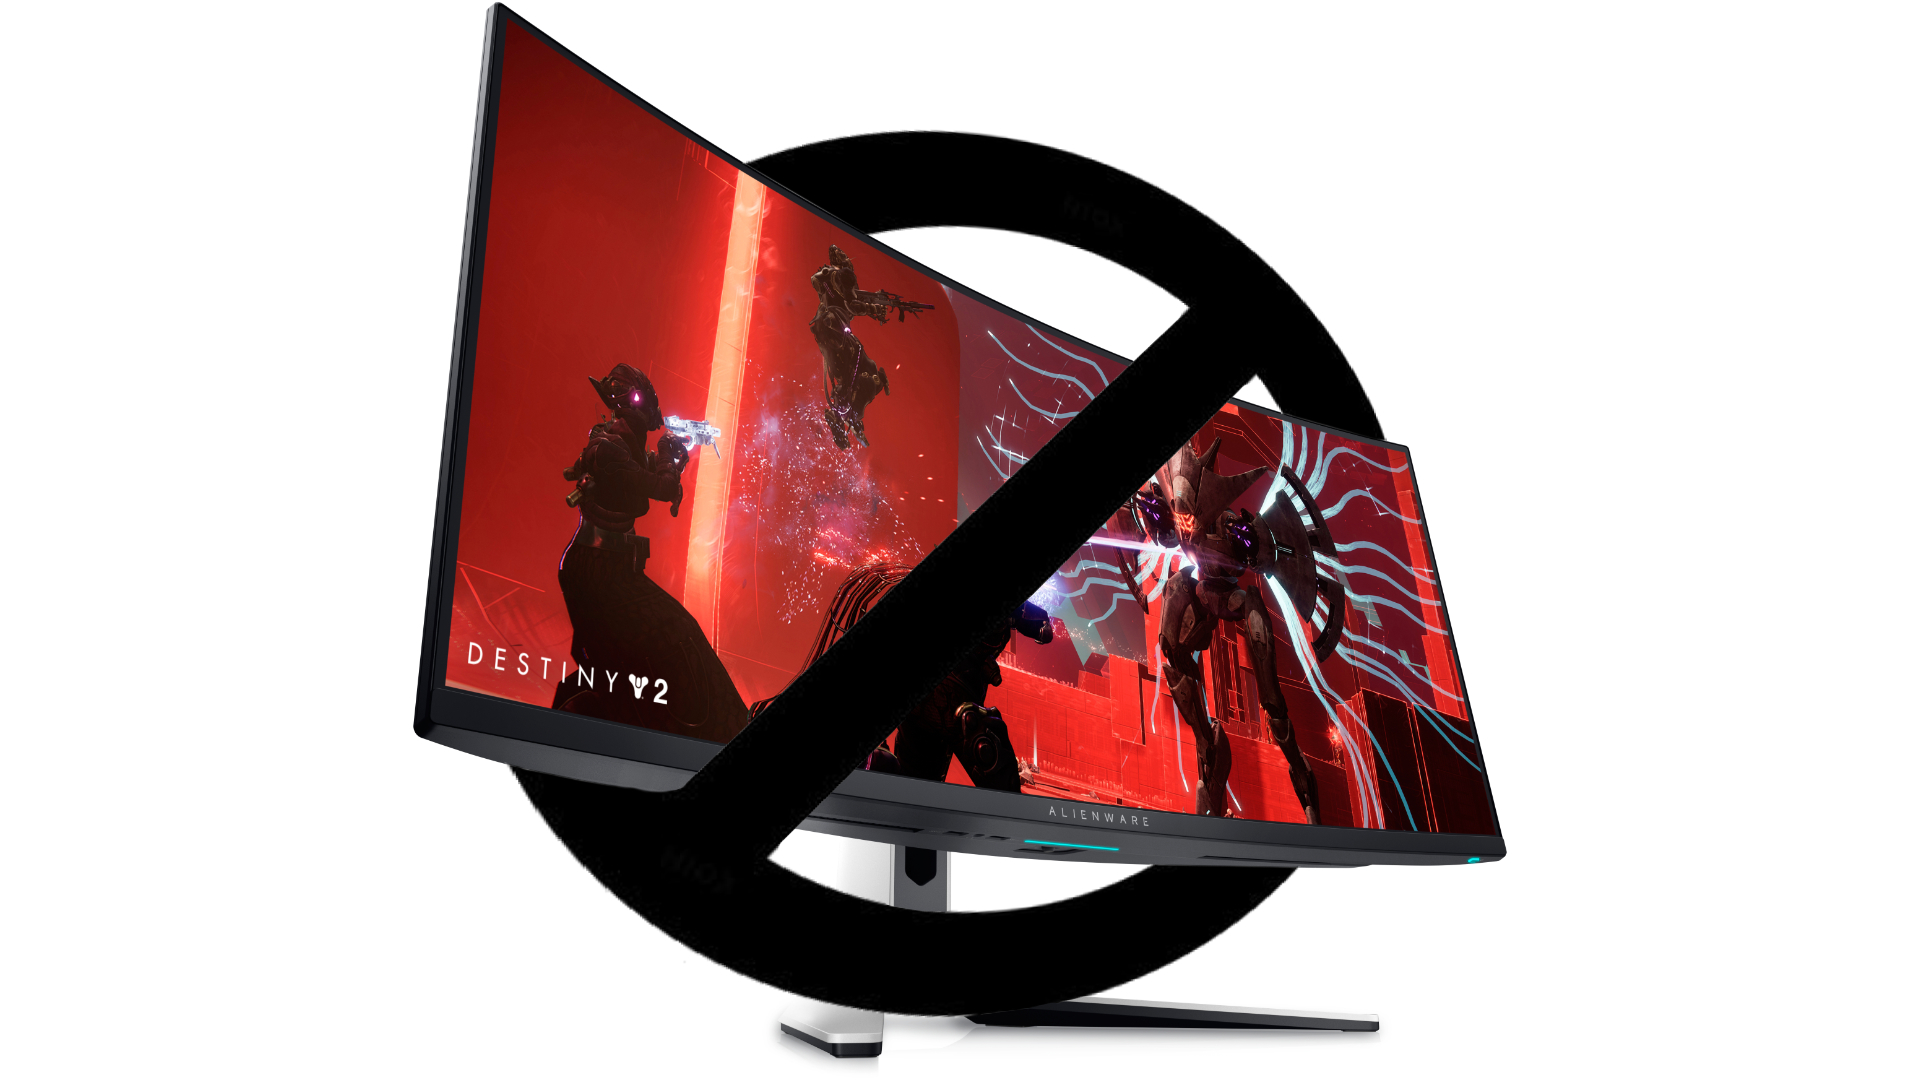 The 34” Alienware AW3423DW and AW3423DWF monitors bring QD-OLED technology  to gaming PCs